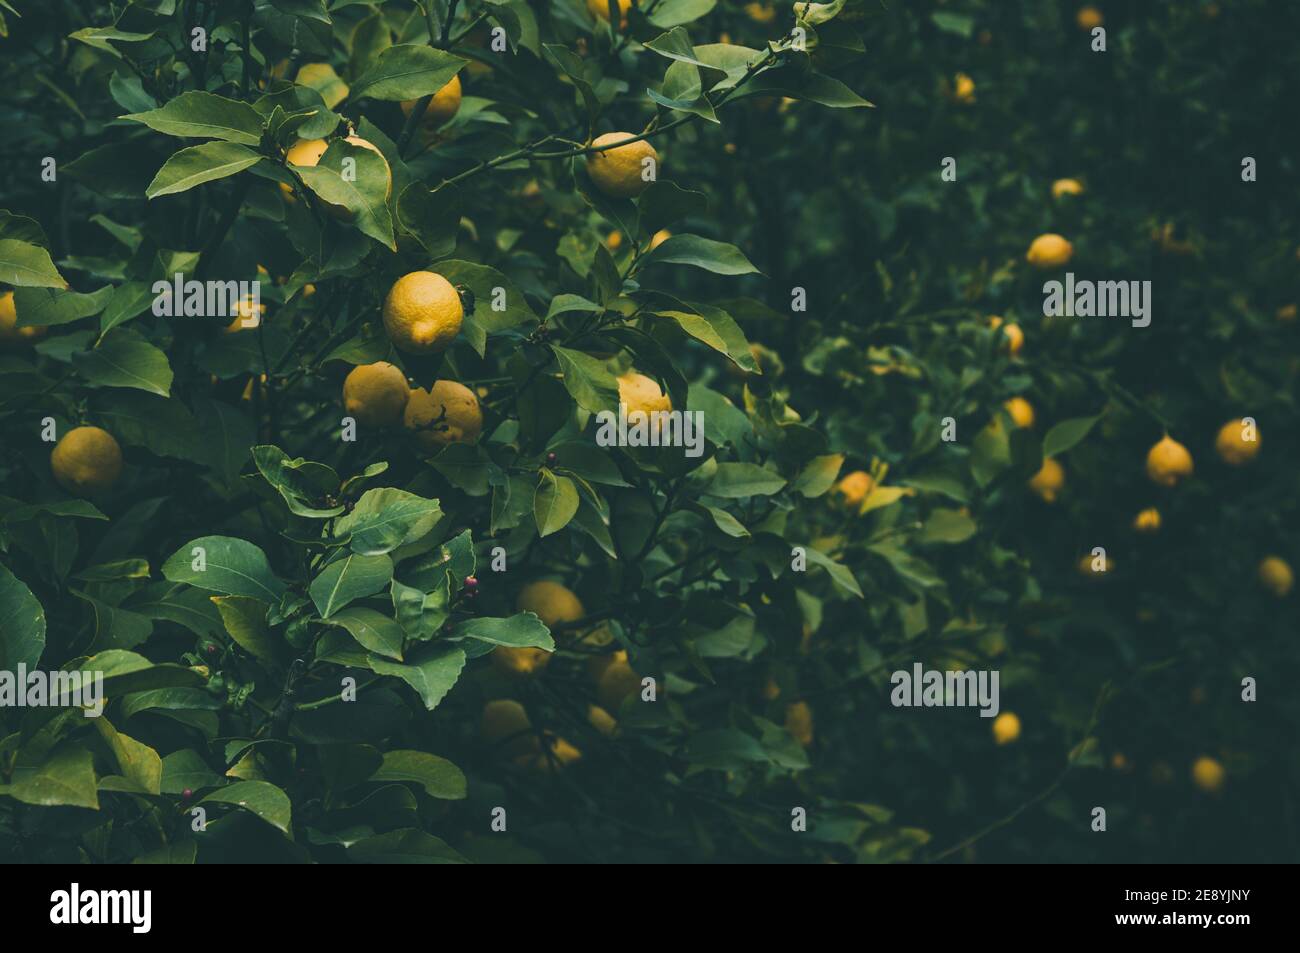 Ripe yellow lemons hang on the lemon tree at plantation. Darkened and vignetted natural background of citrus tree. Stock Photo